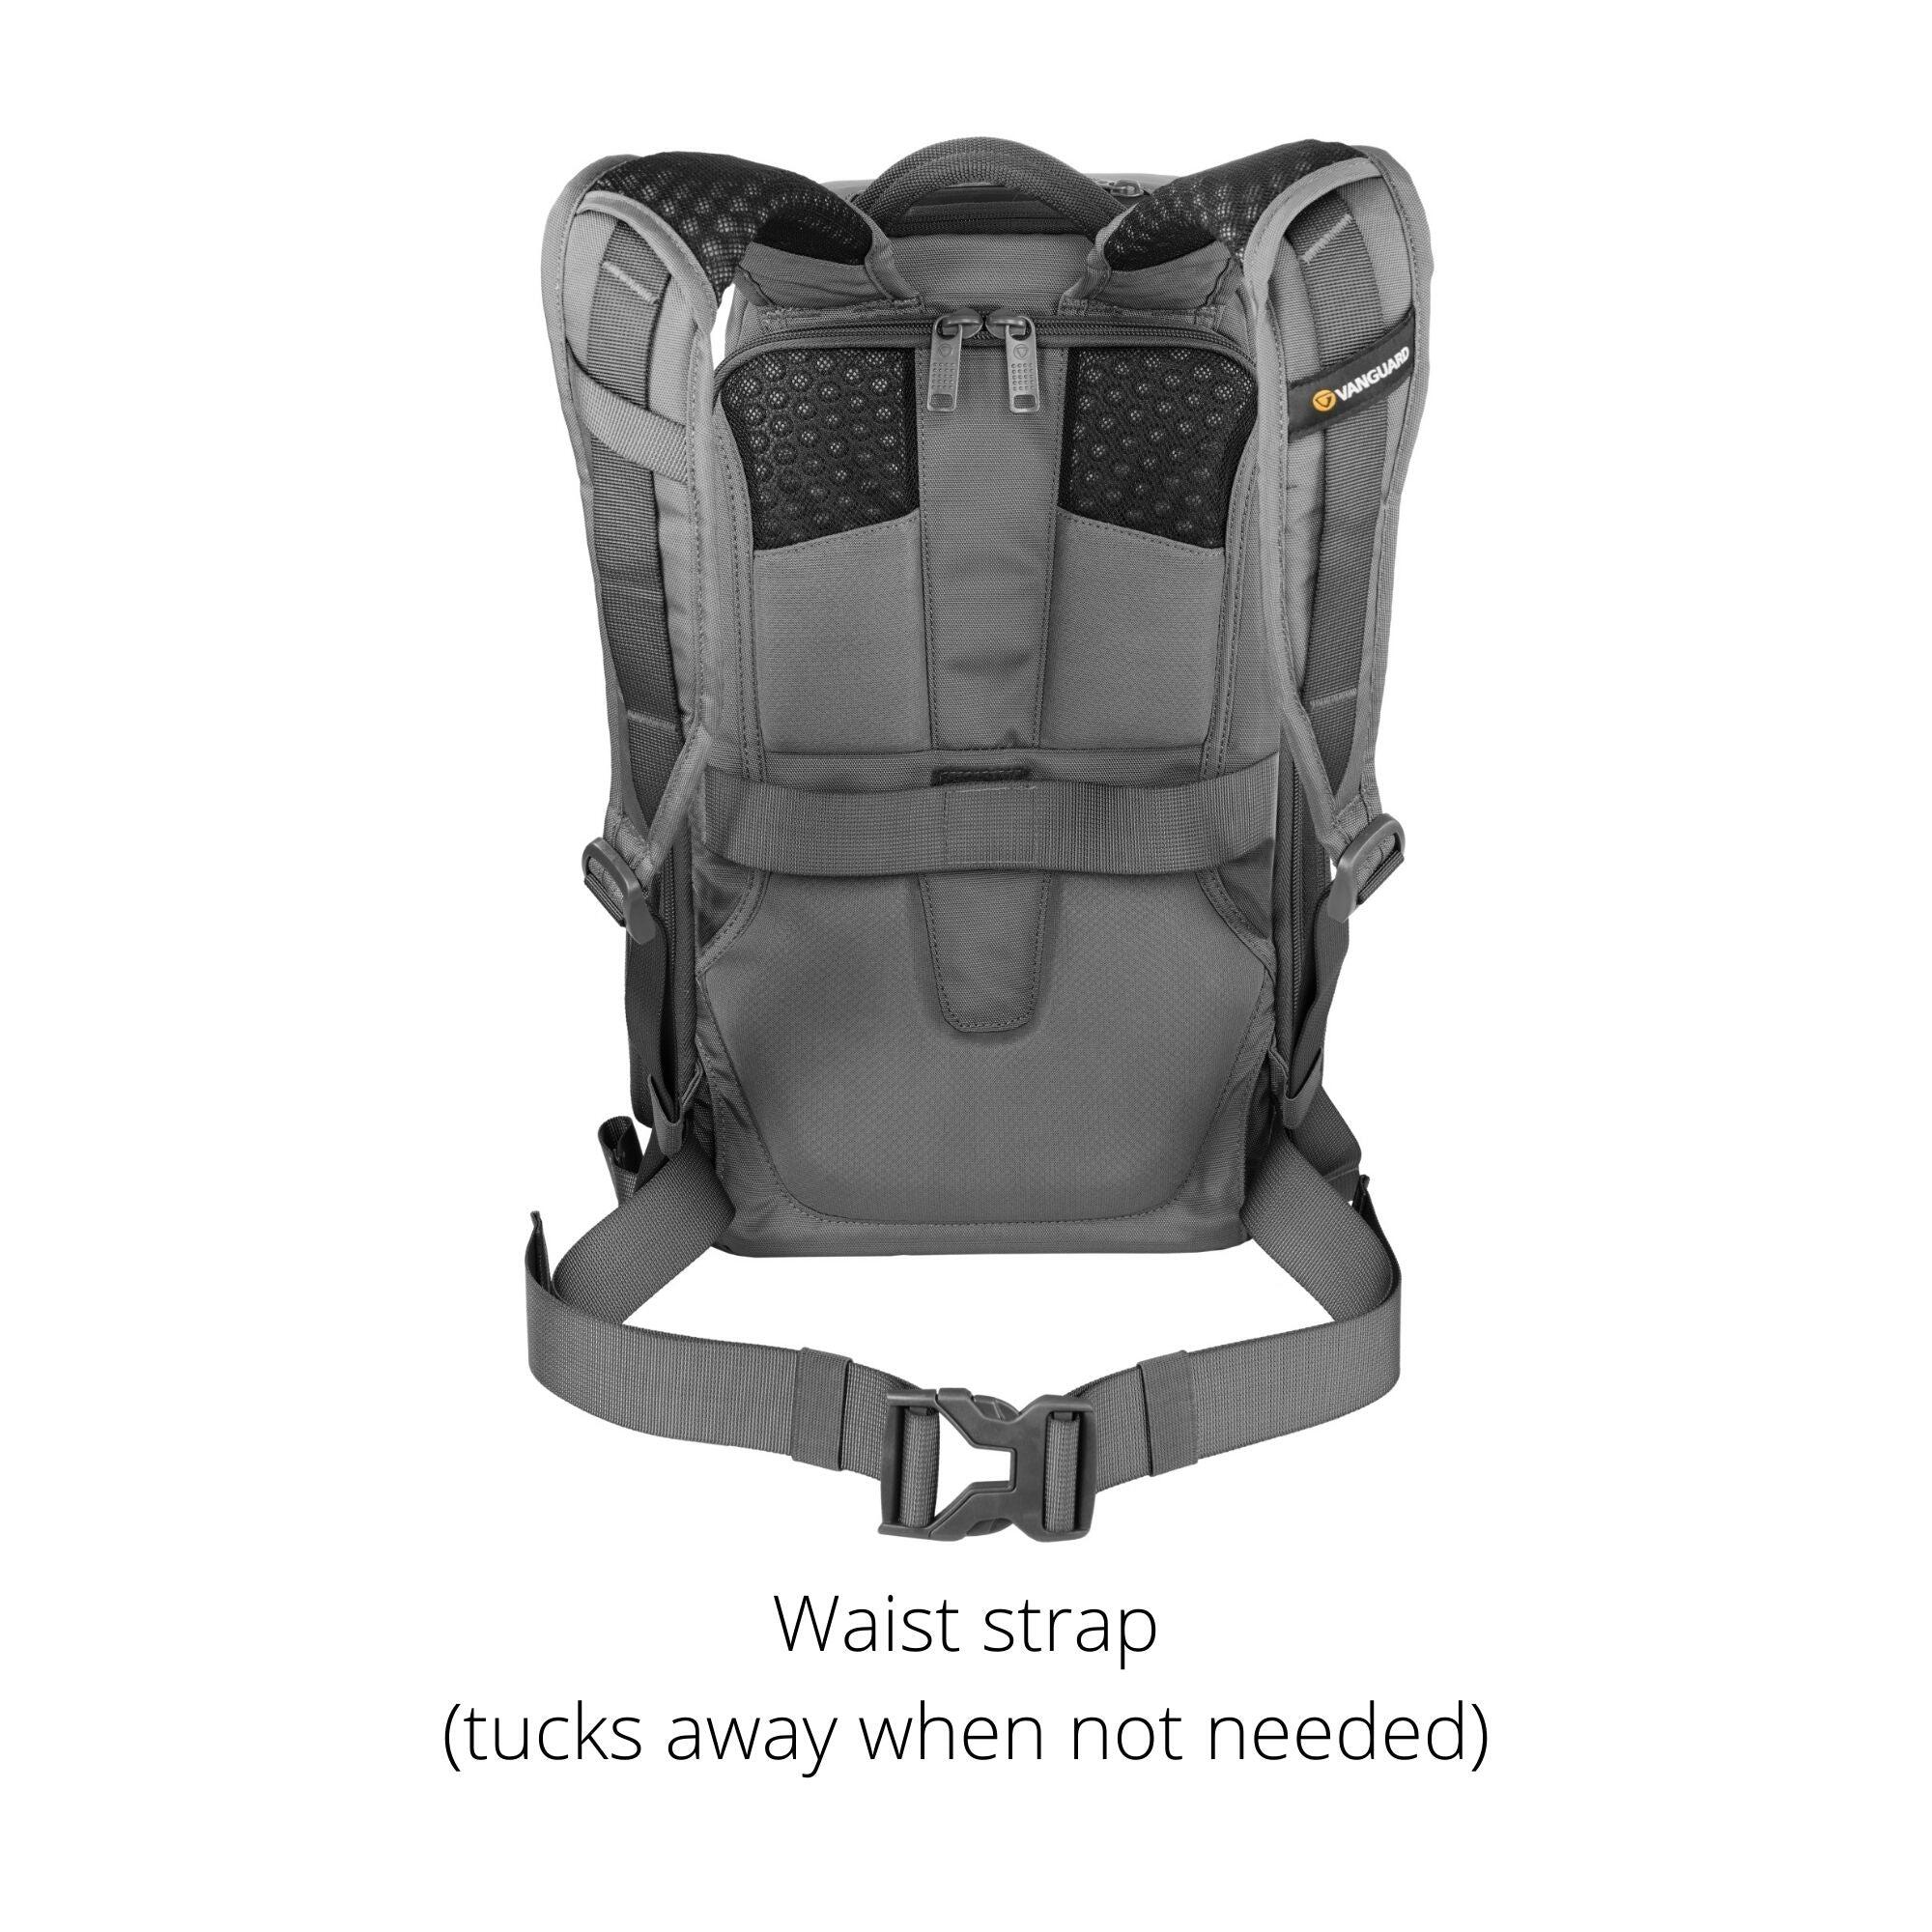 VEO ADAPTOR R48 GY Camera Backpack with USB Port - Grey 3/5